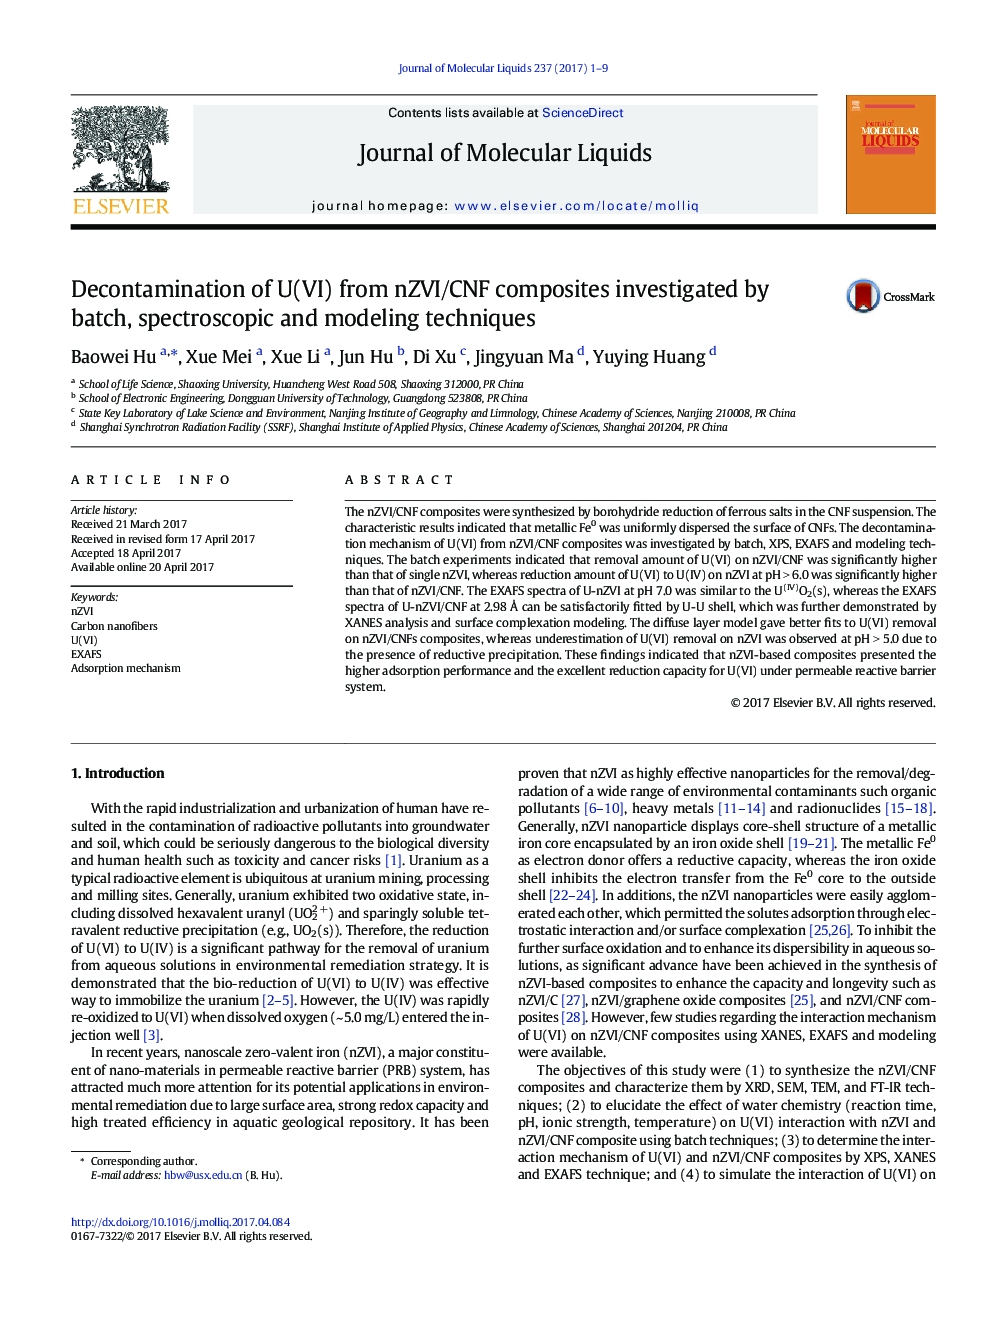 Decontamination of U(VI) from nZVI/CNF composites investigated by batch, spectroscopic and modeling techniques